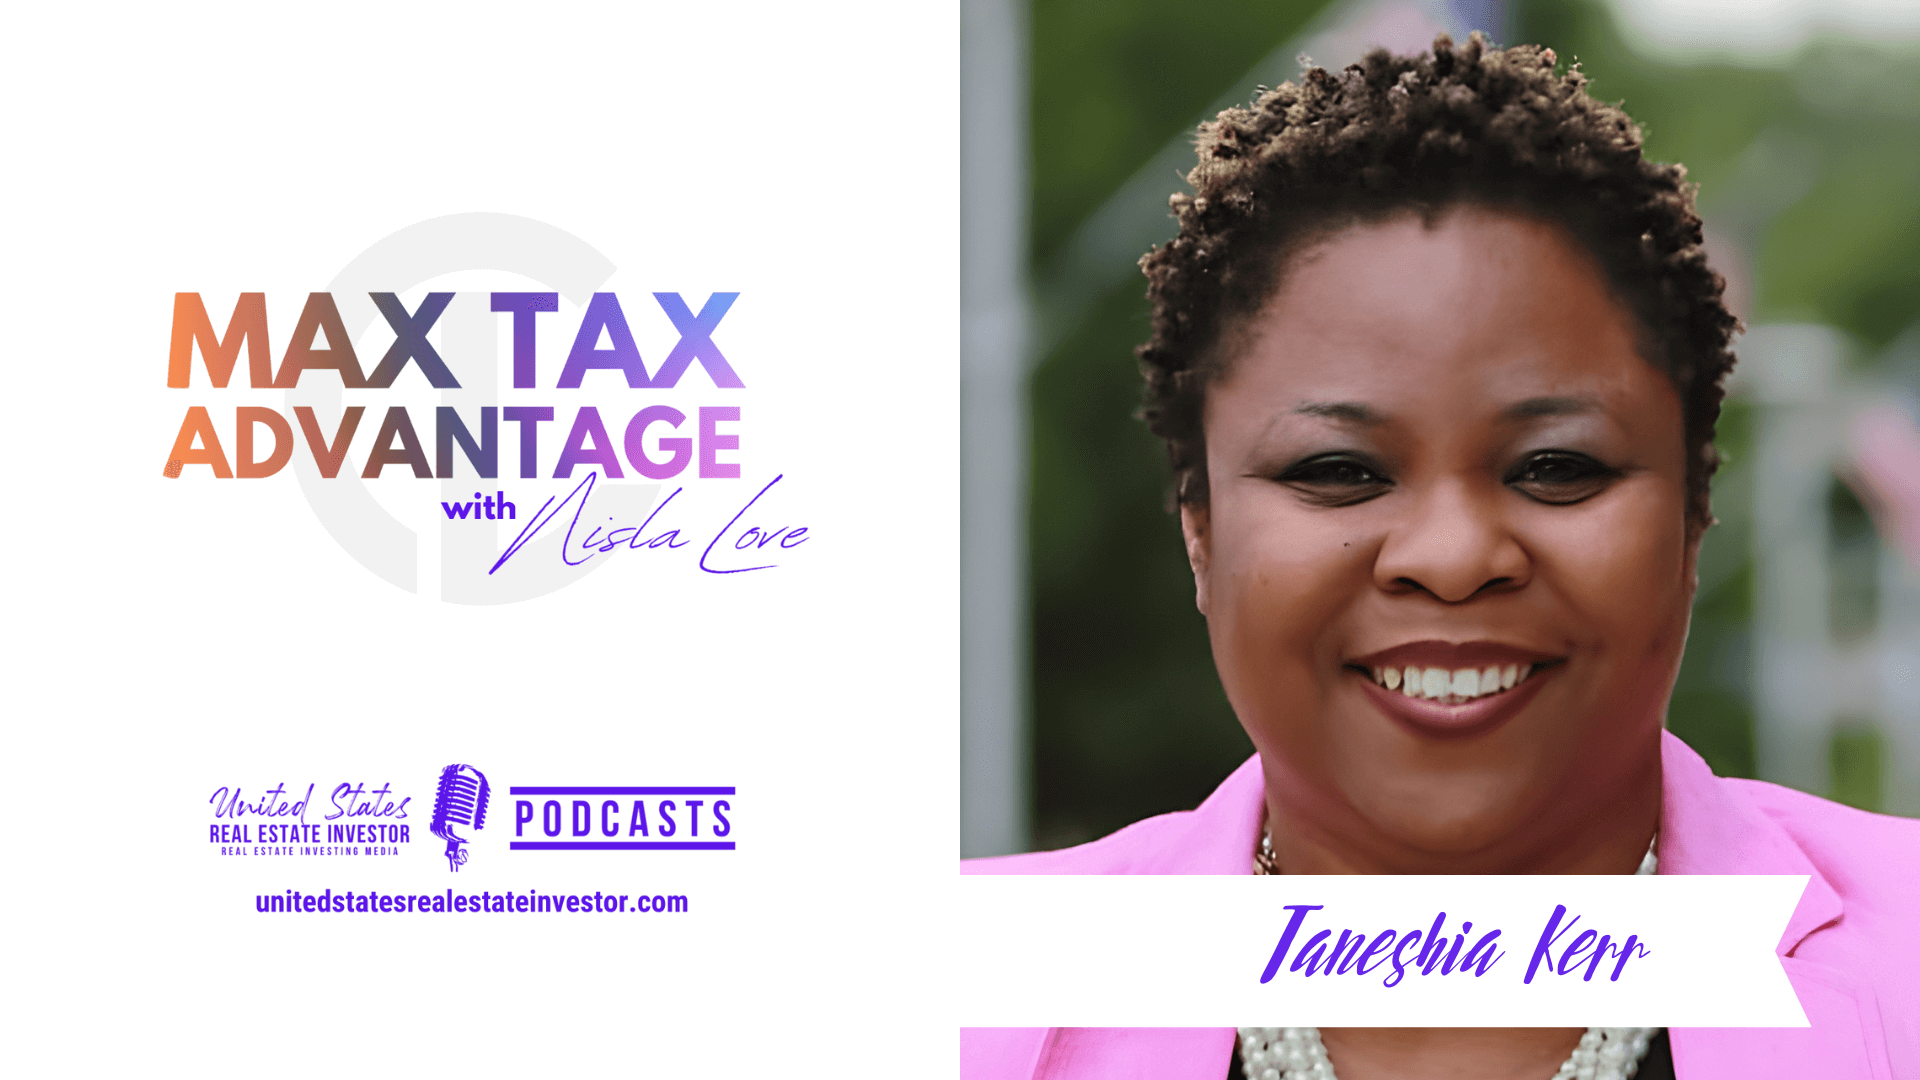 Overcoming Unbelievable Odds While Flourishing In Your Business with Taneshia Kerr on Max Tax Advantage with Nisla Love